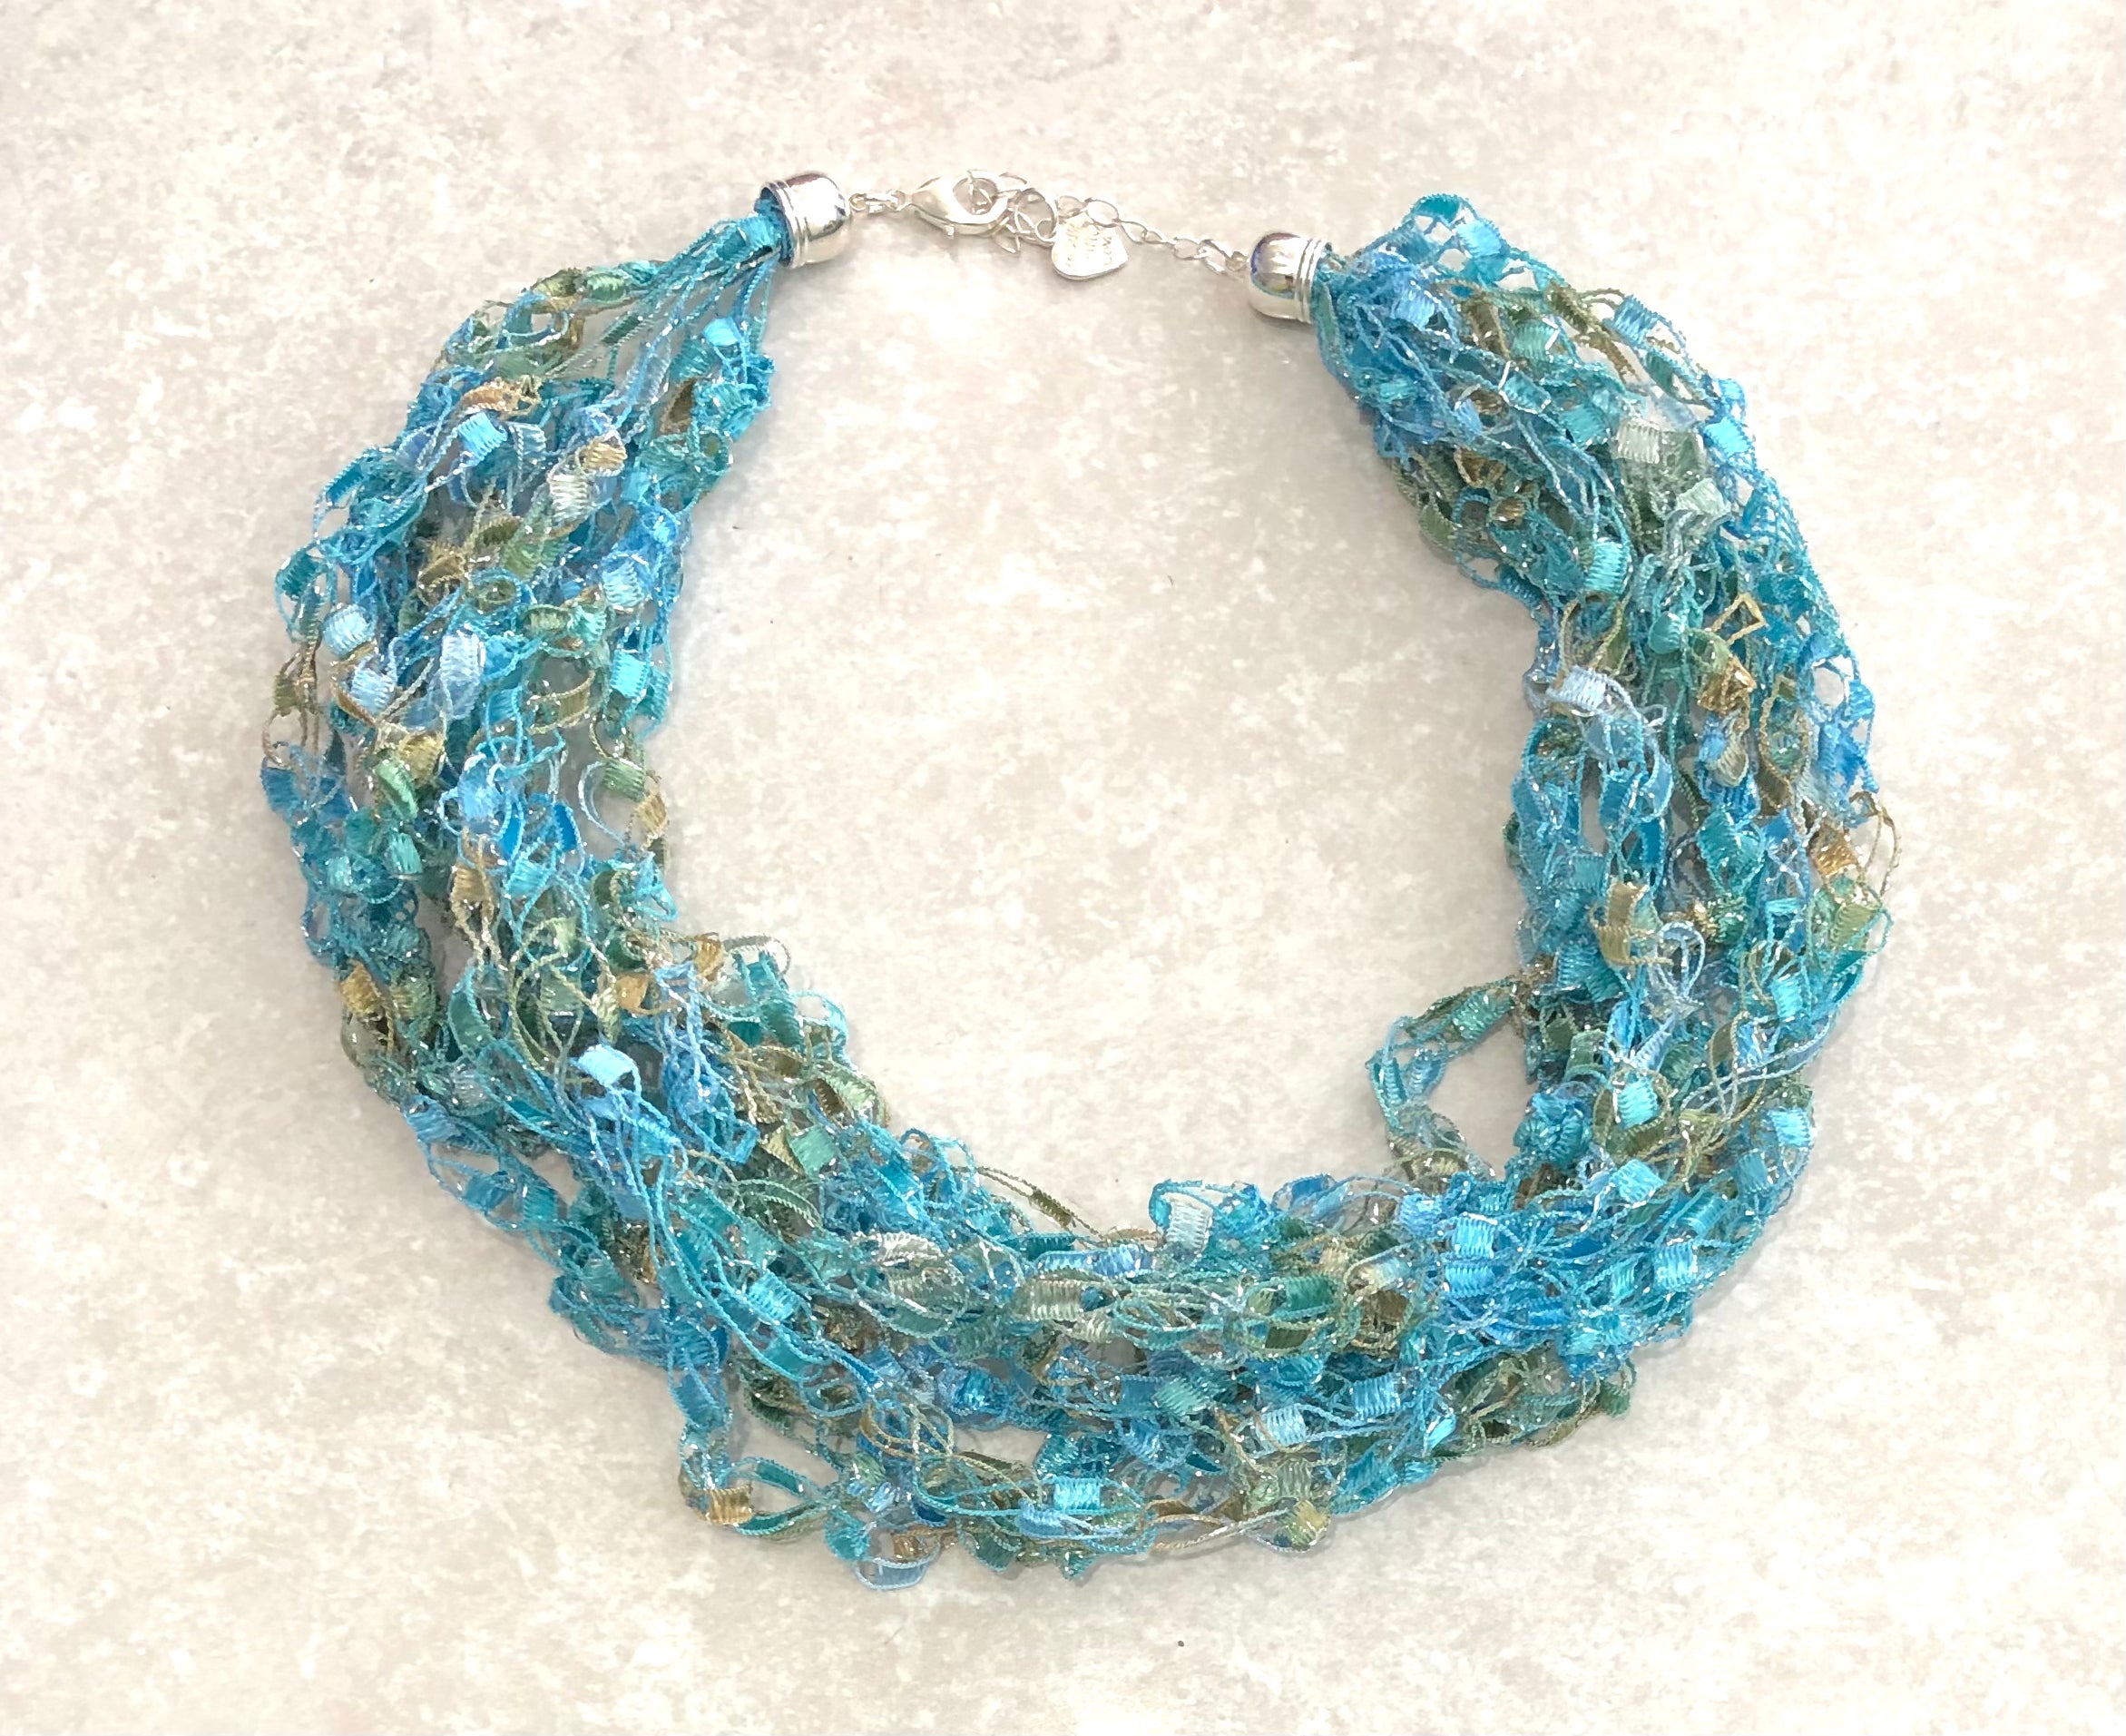 Made by Trish Turquoise and Gold Chain Crochet Necklace